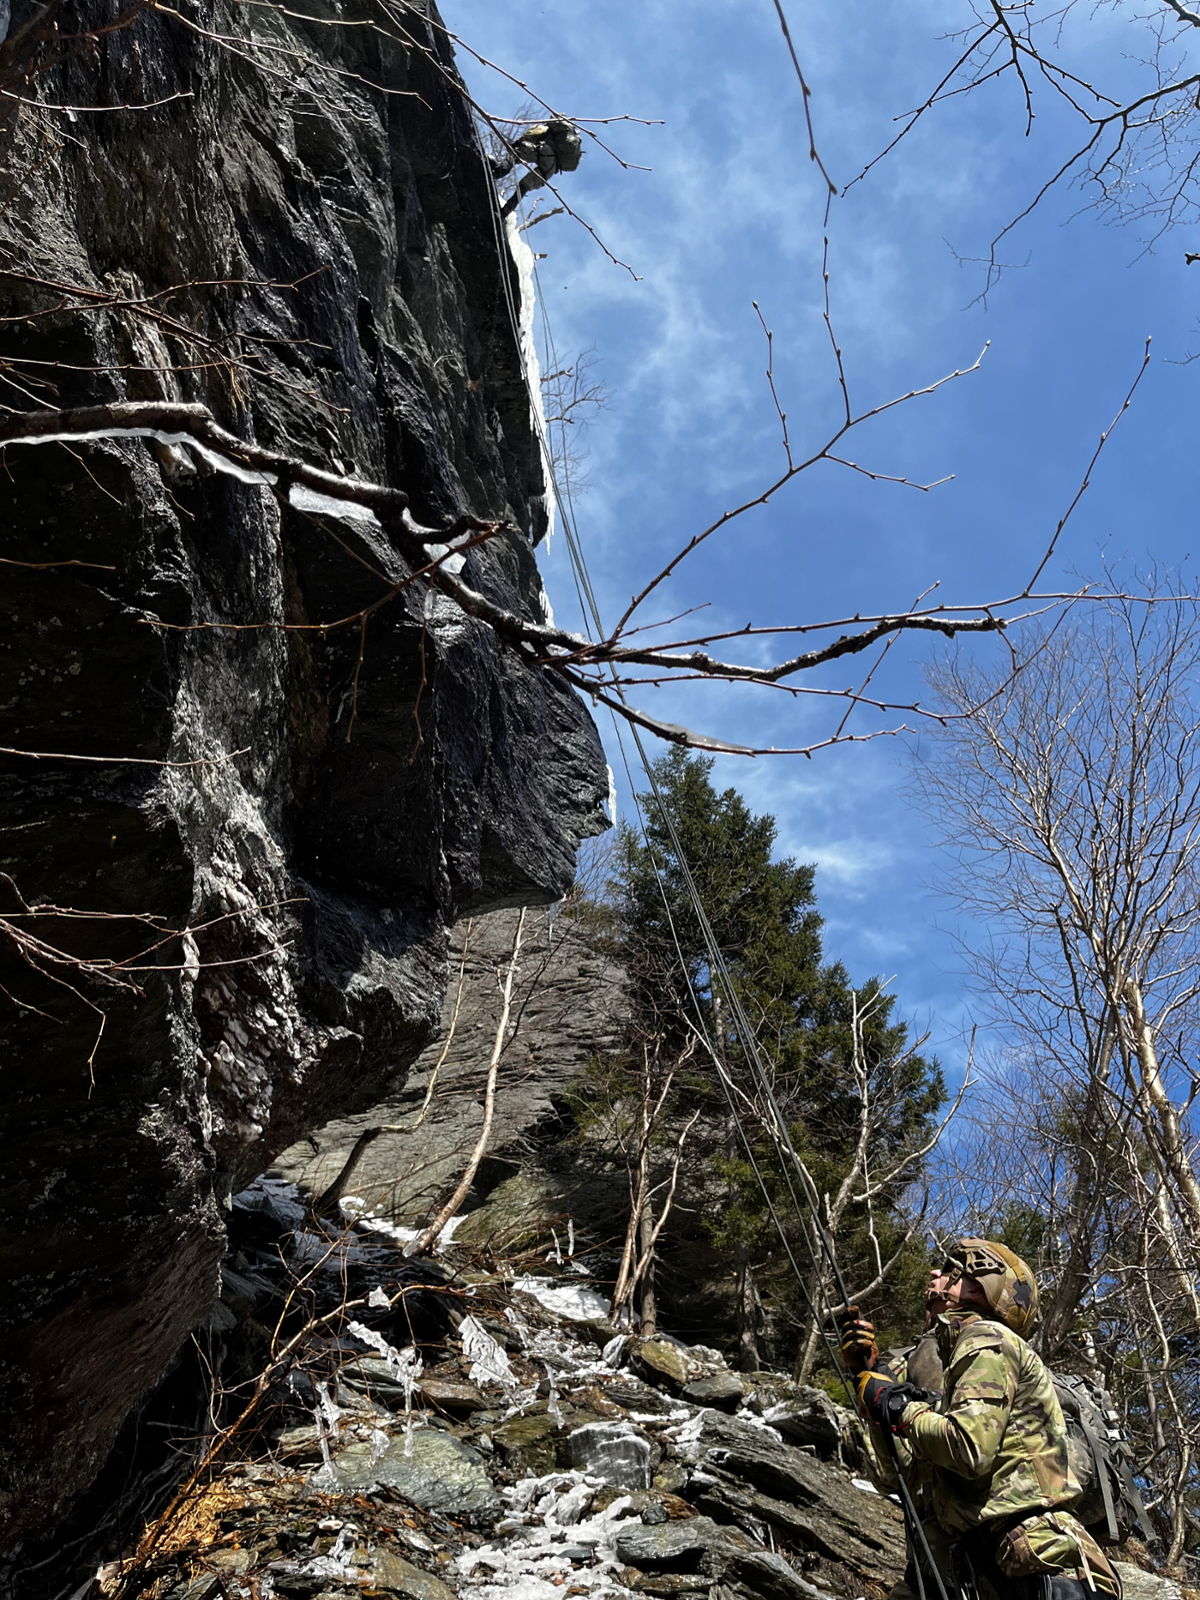 Reagan is completing an exercise on Mount Mansfield in Vermont at the Army Mountain Warfare School.